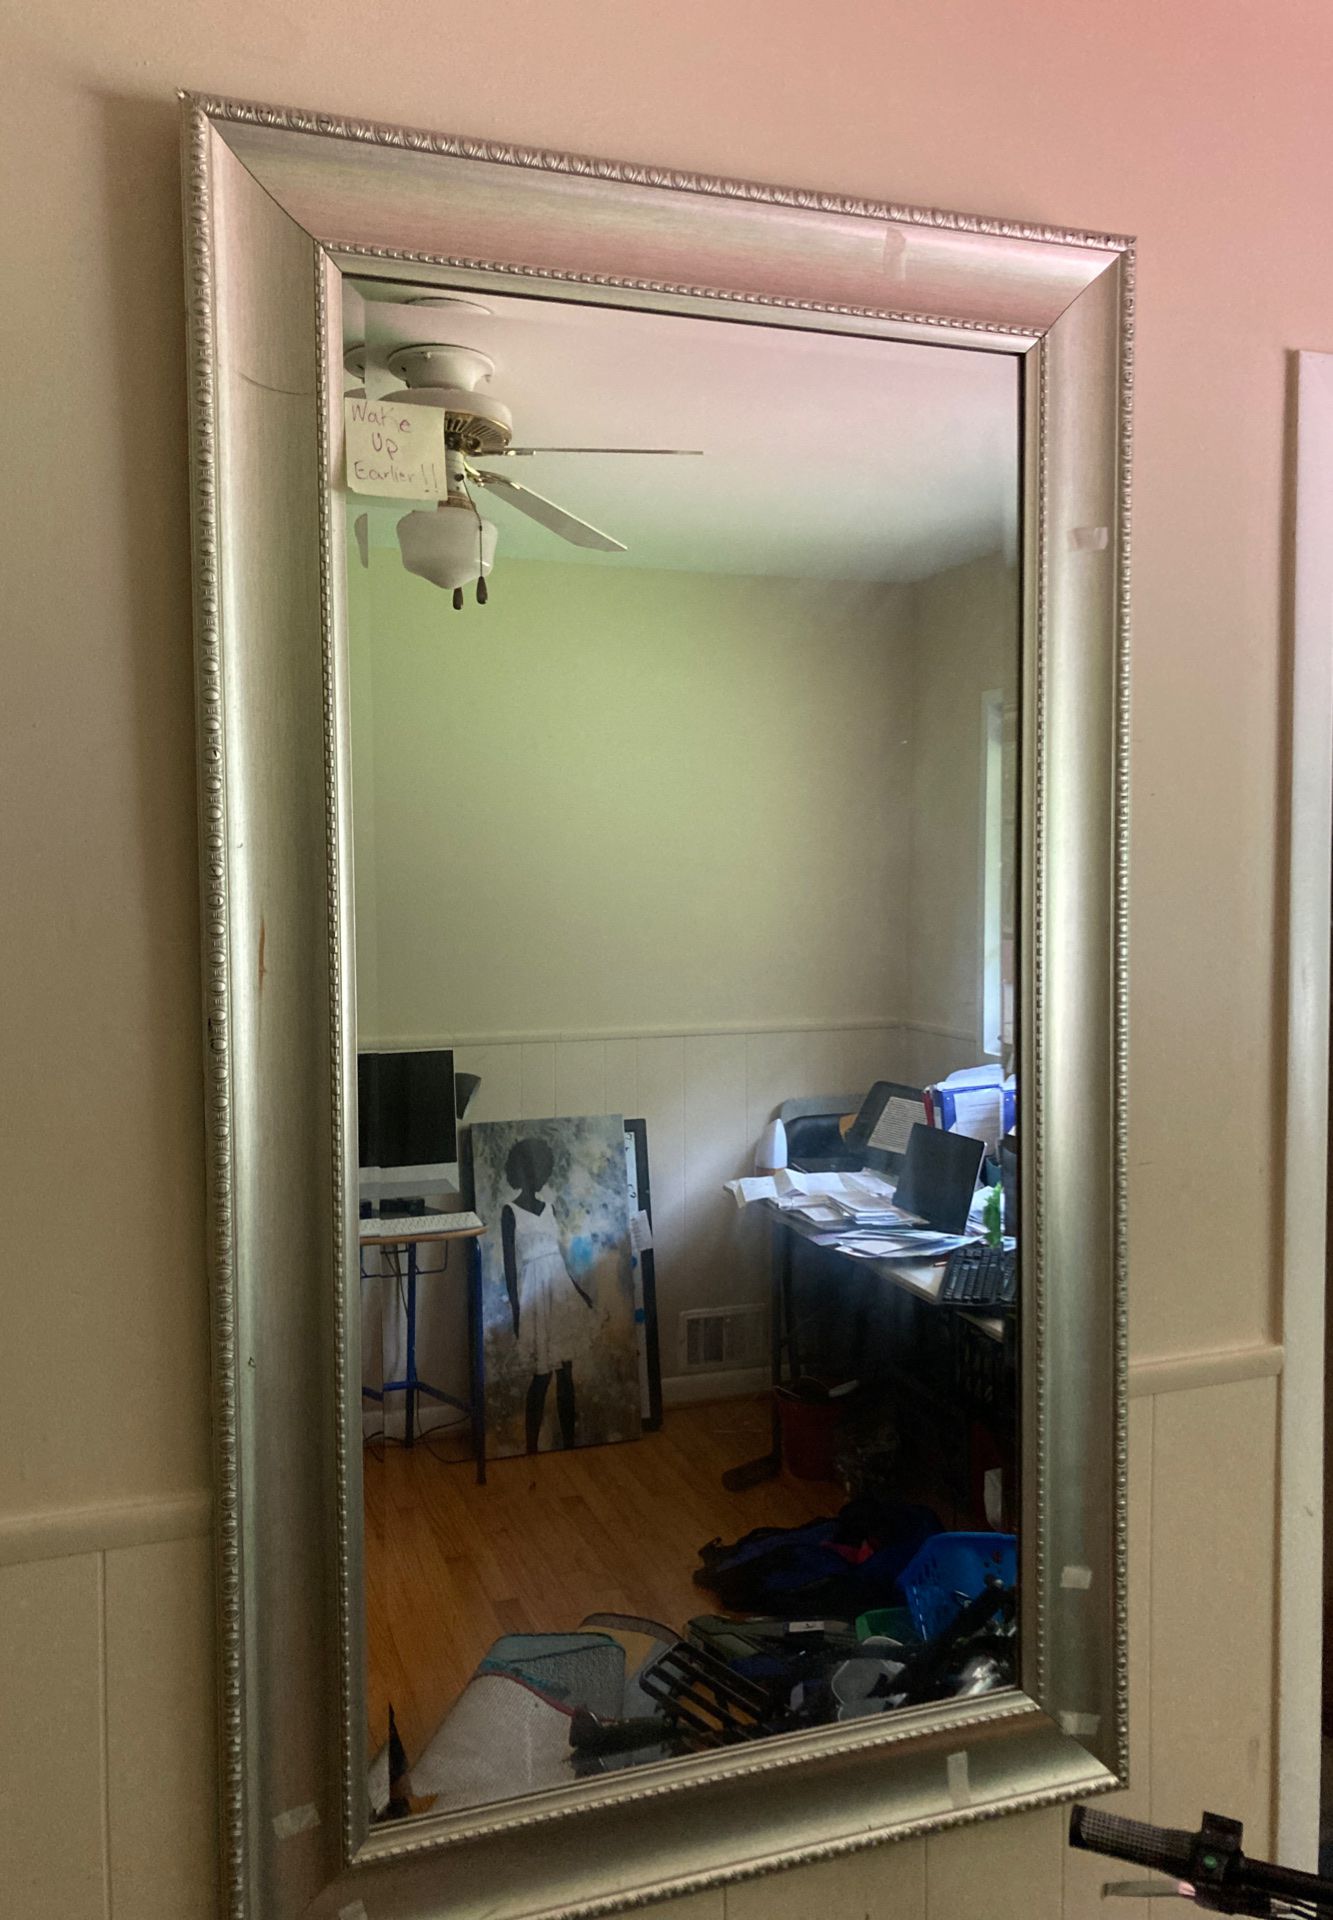 Matching silver framed mirrors